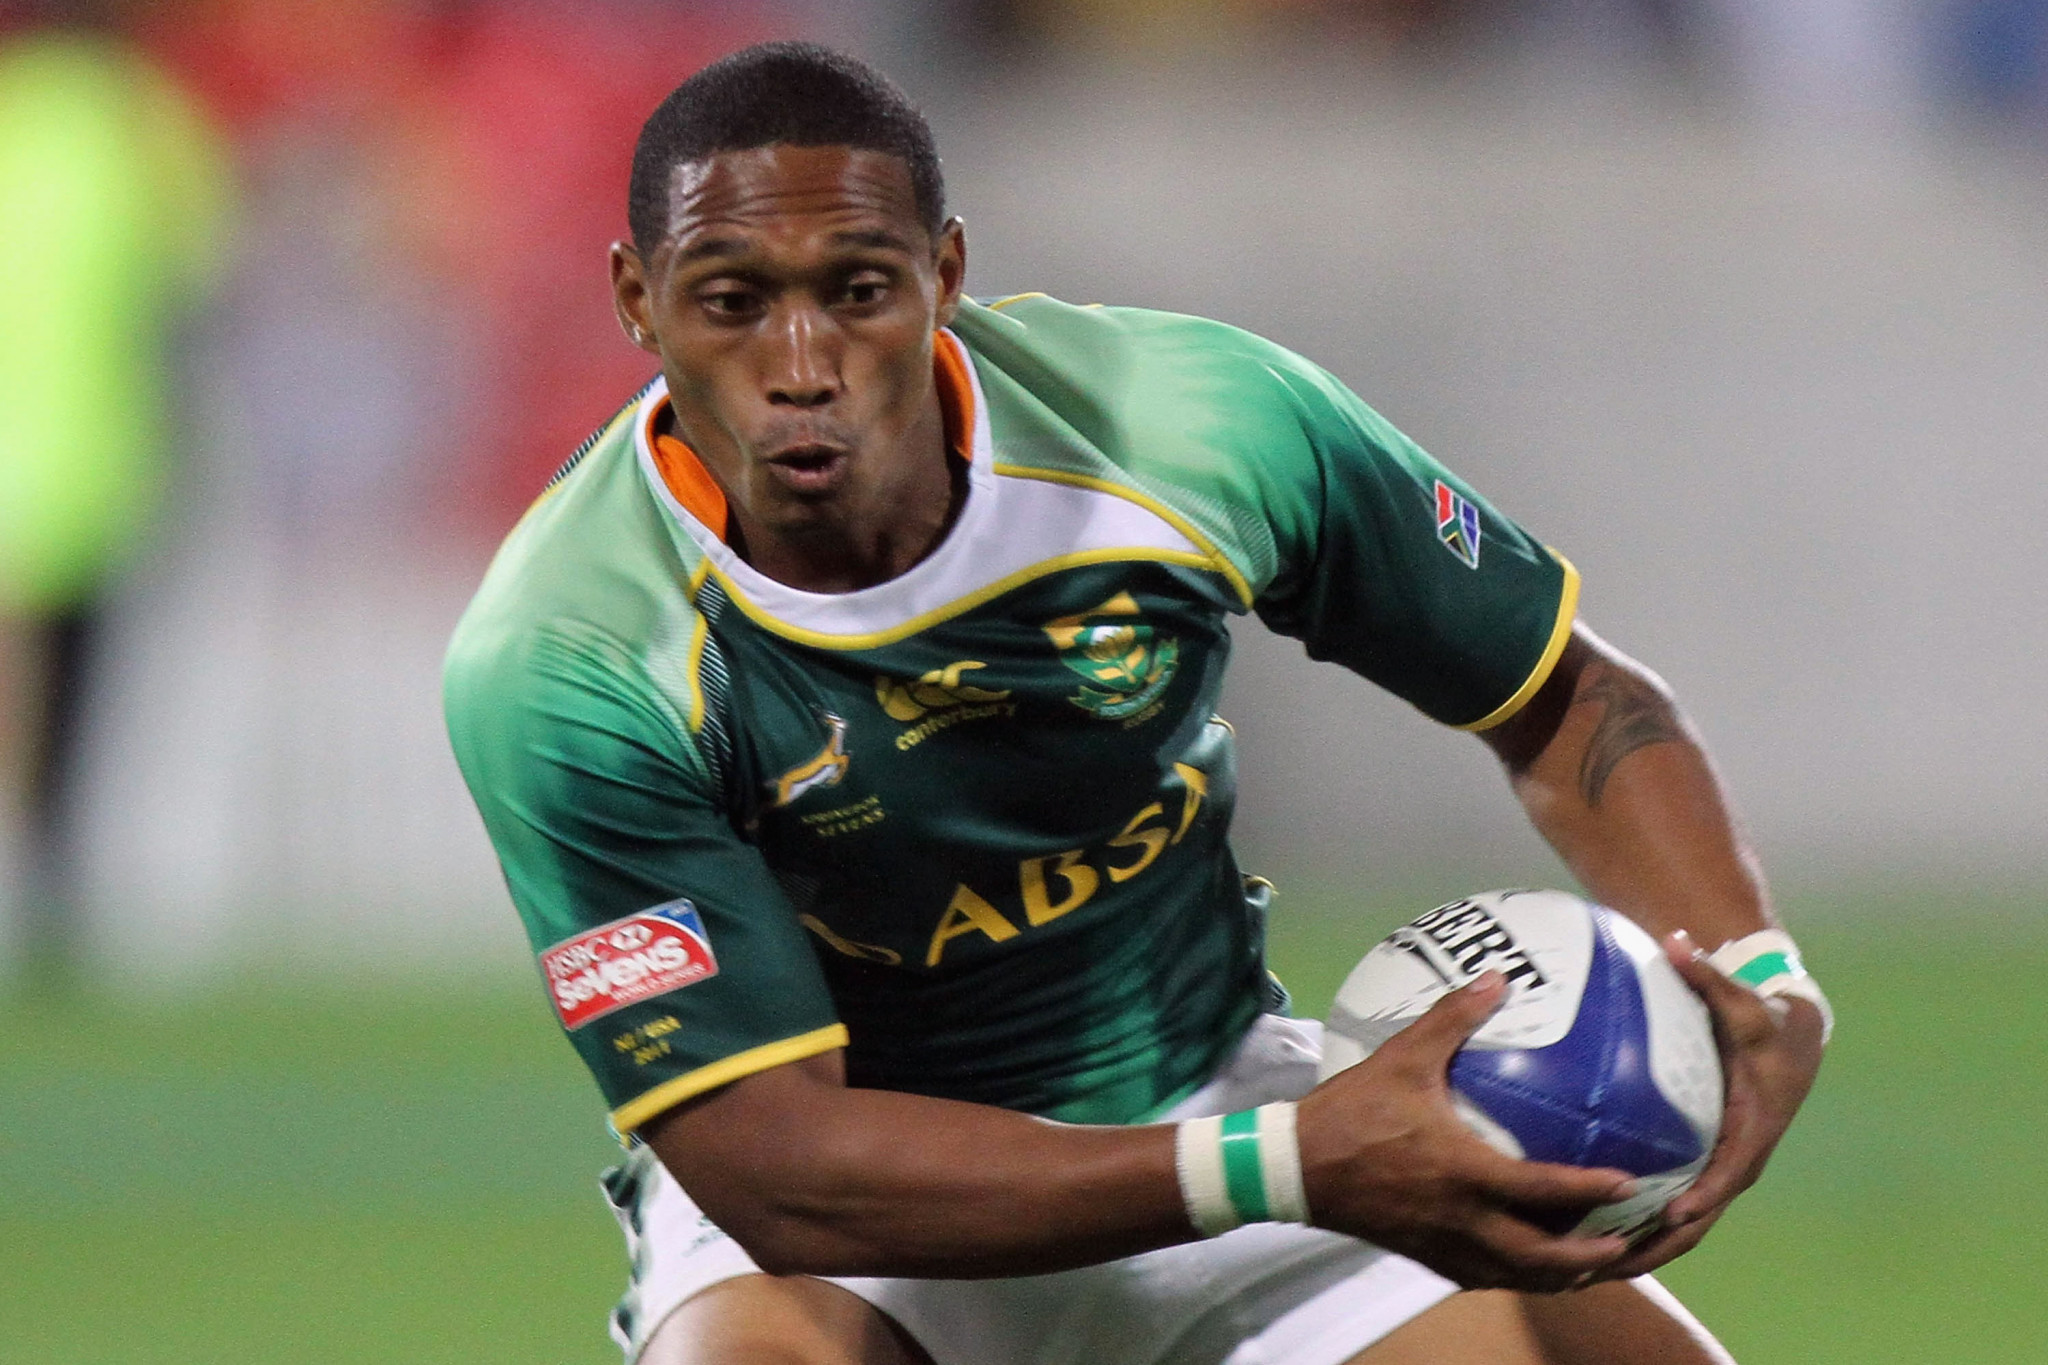 COVID disruption to South African Olympic rugby sevens team a "small distraction", coach claims